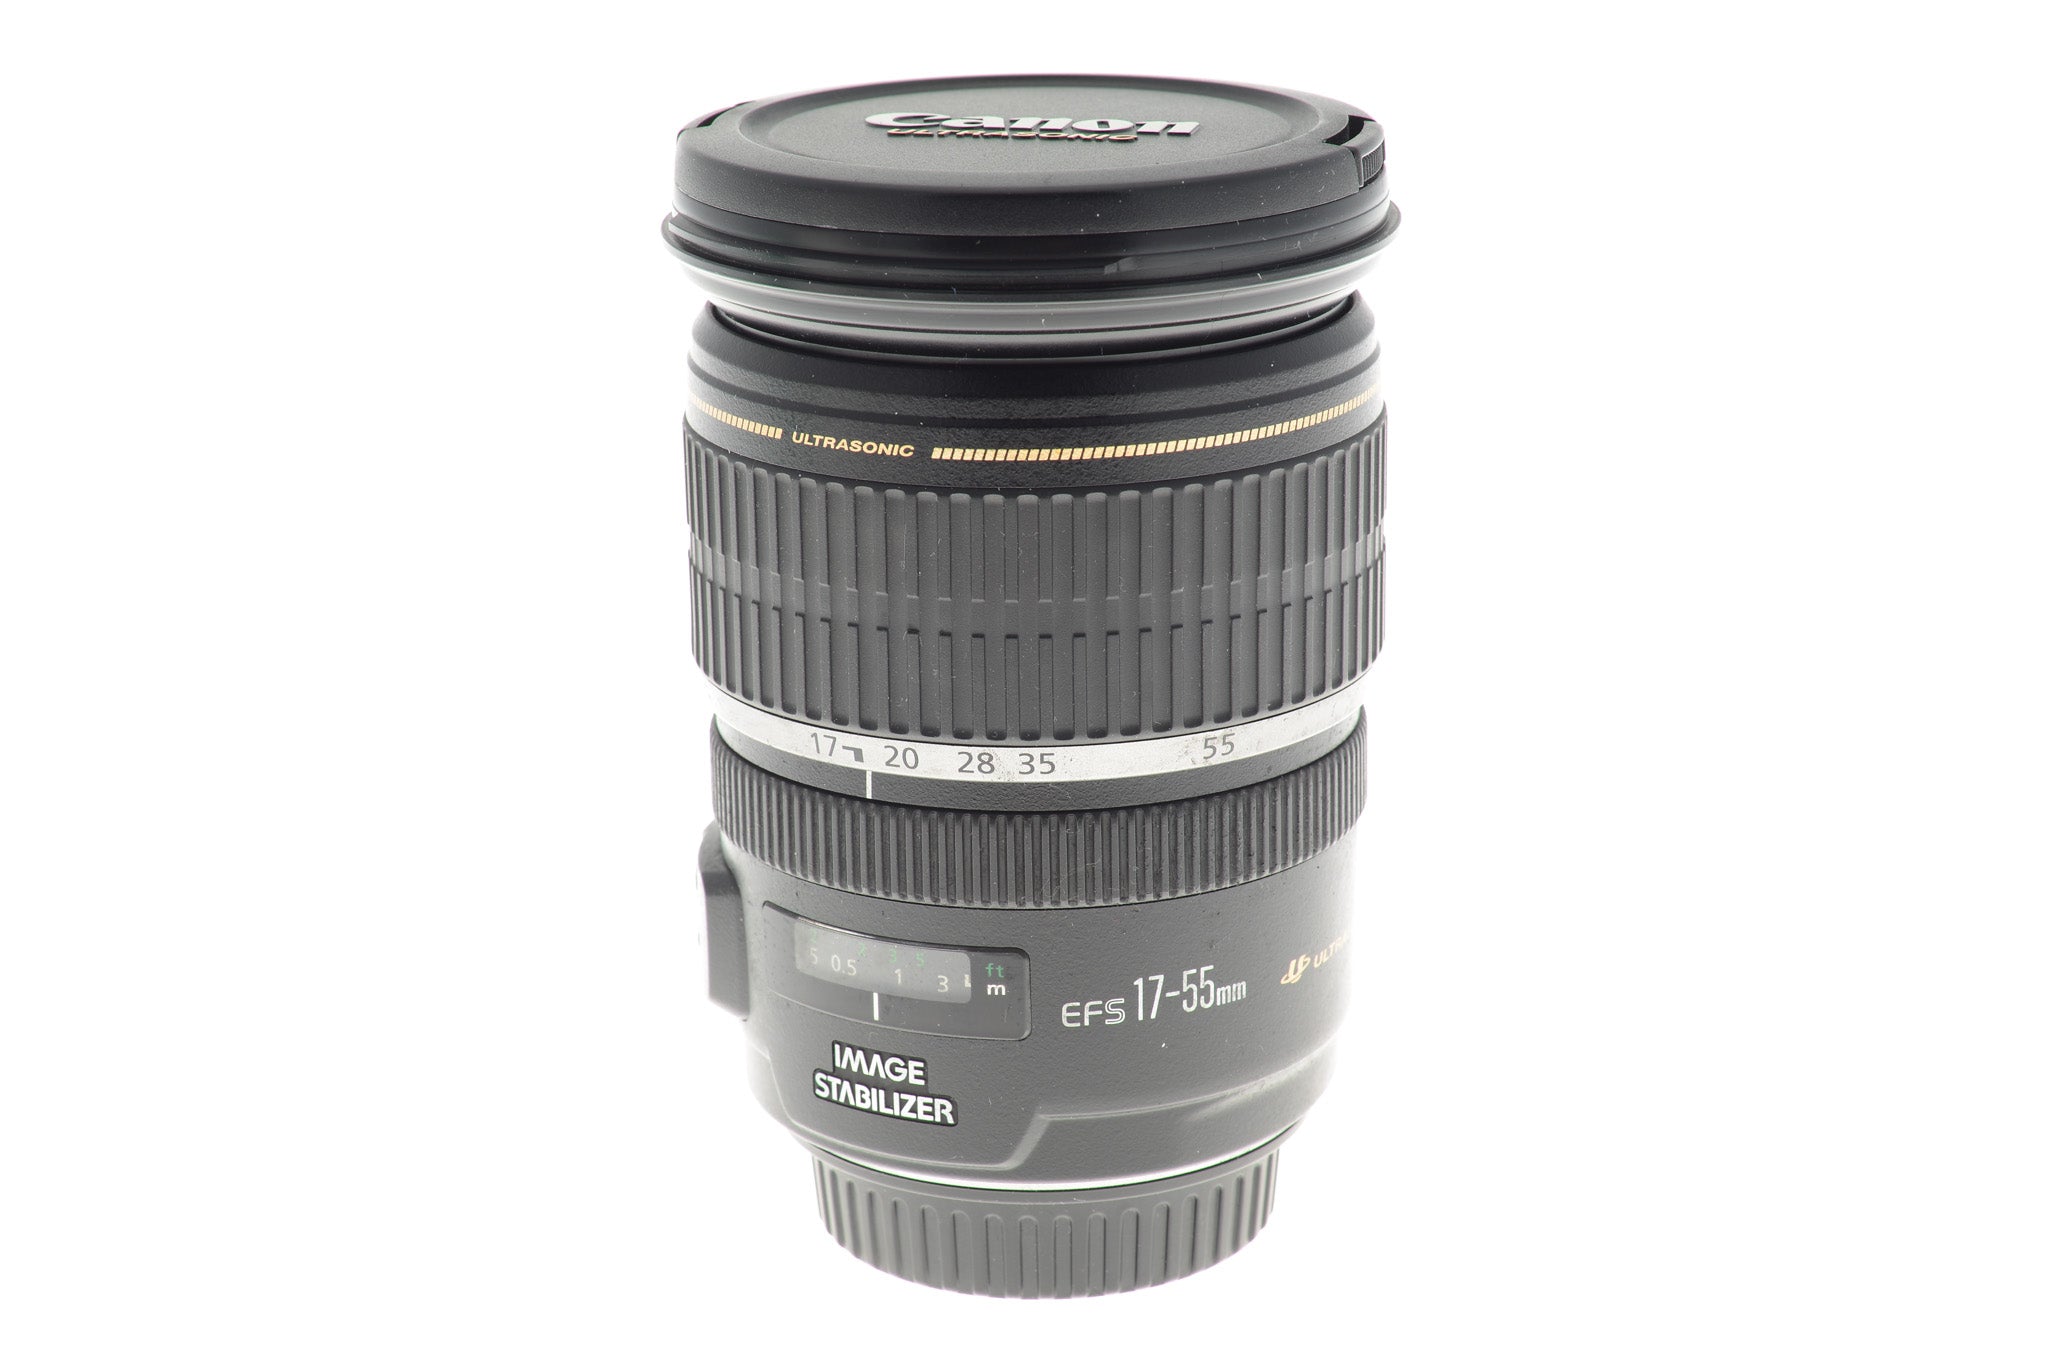 Canon 17-55mm f2.8 IS USM - Lens